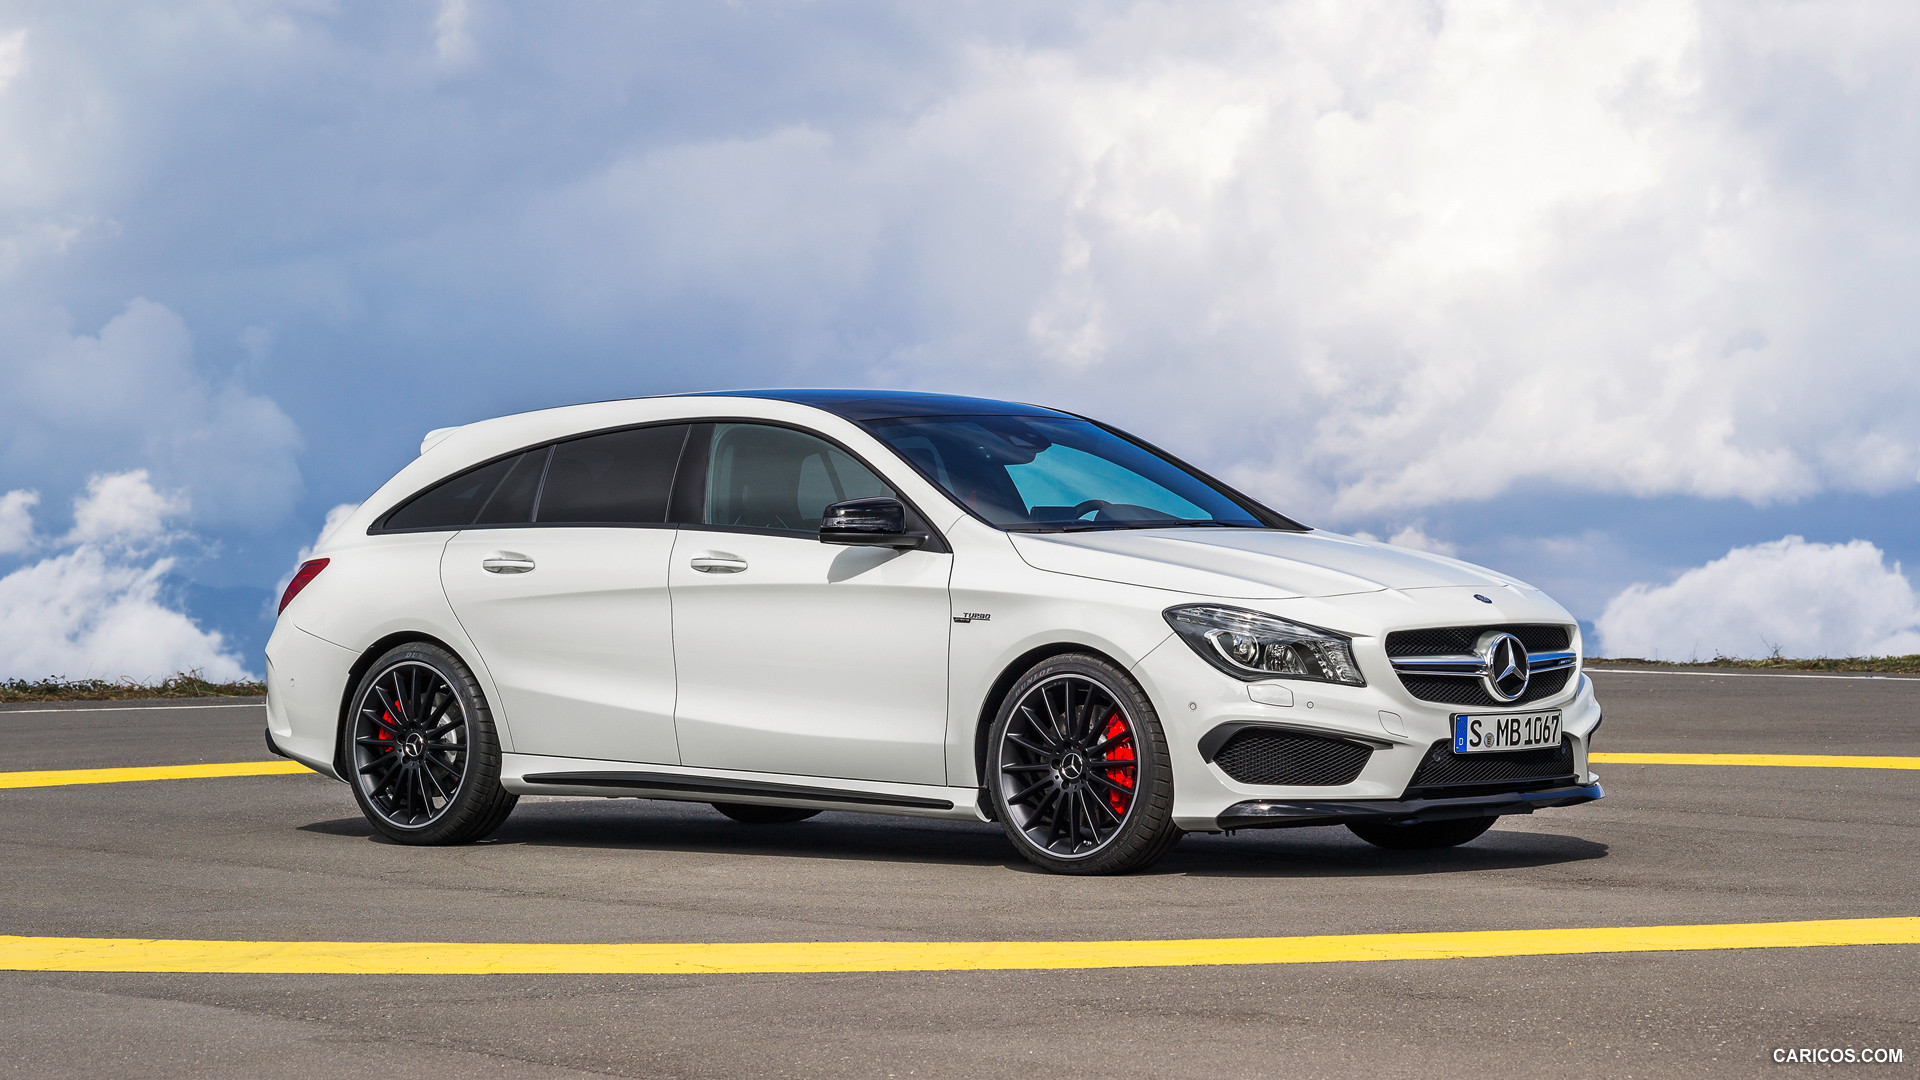 2015 Mercedes-Benz CLA 45 AMG Shooting Brake (Calcite White) - Front, #17 of 70